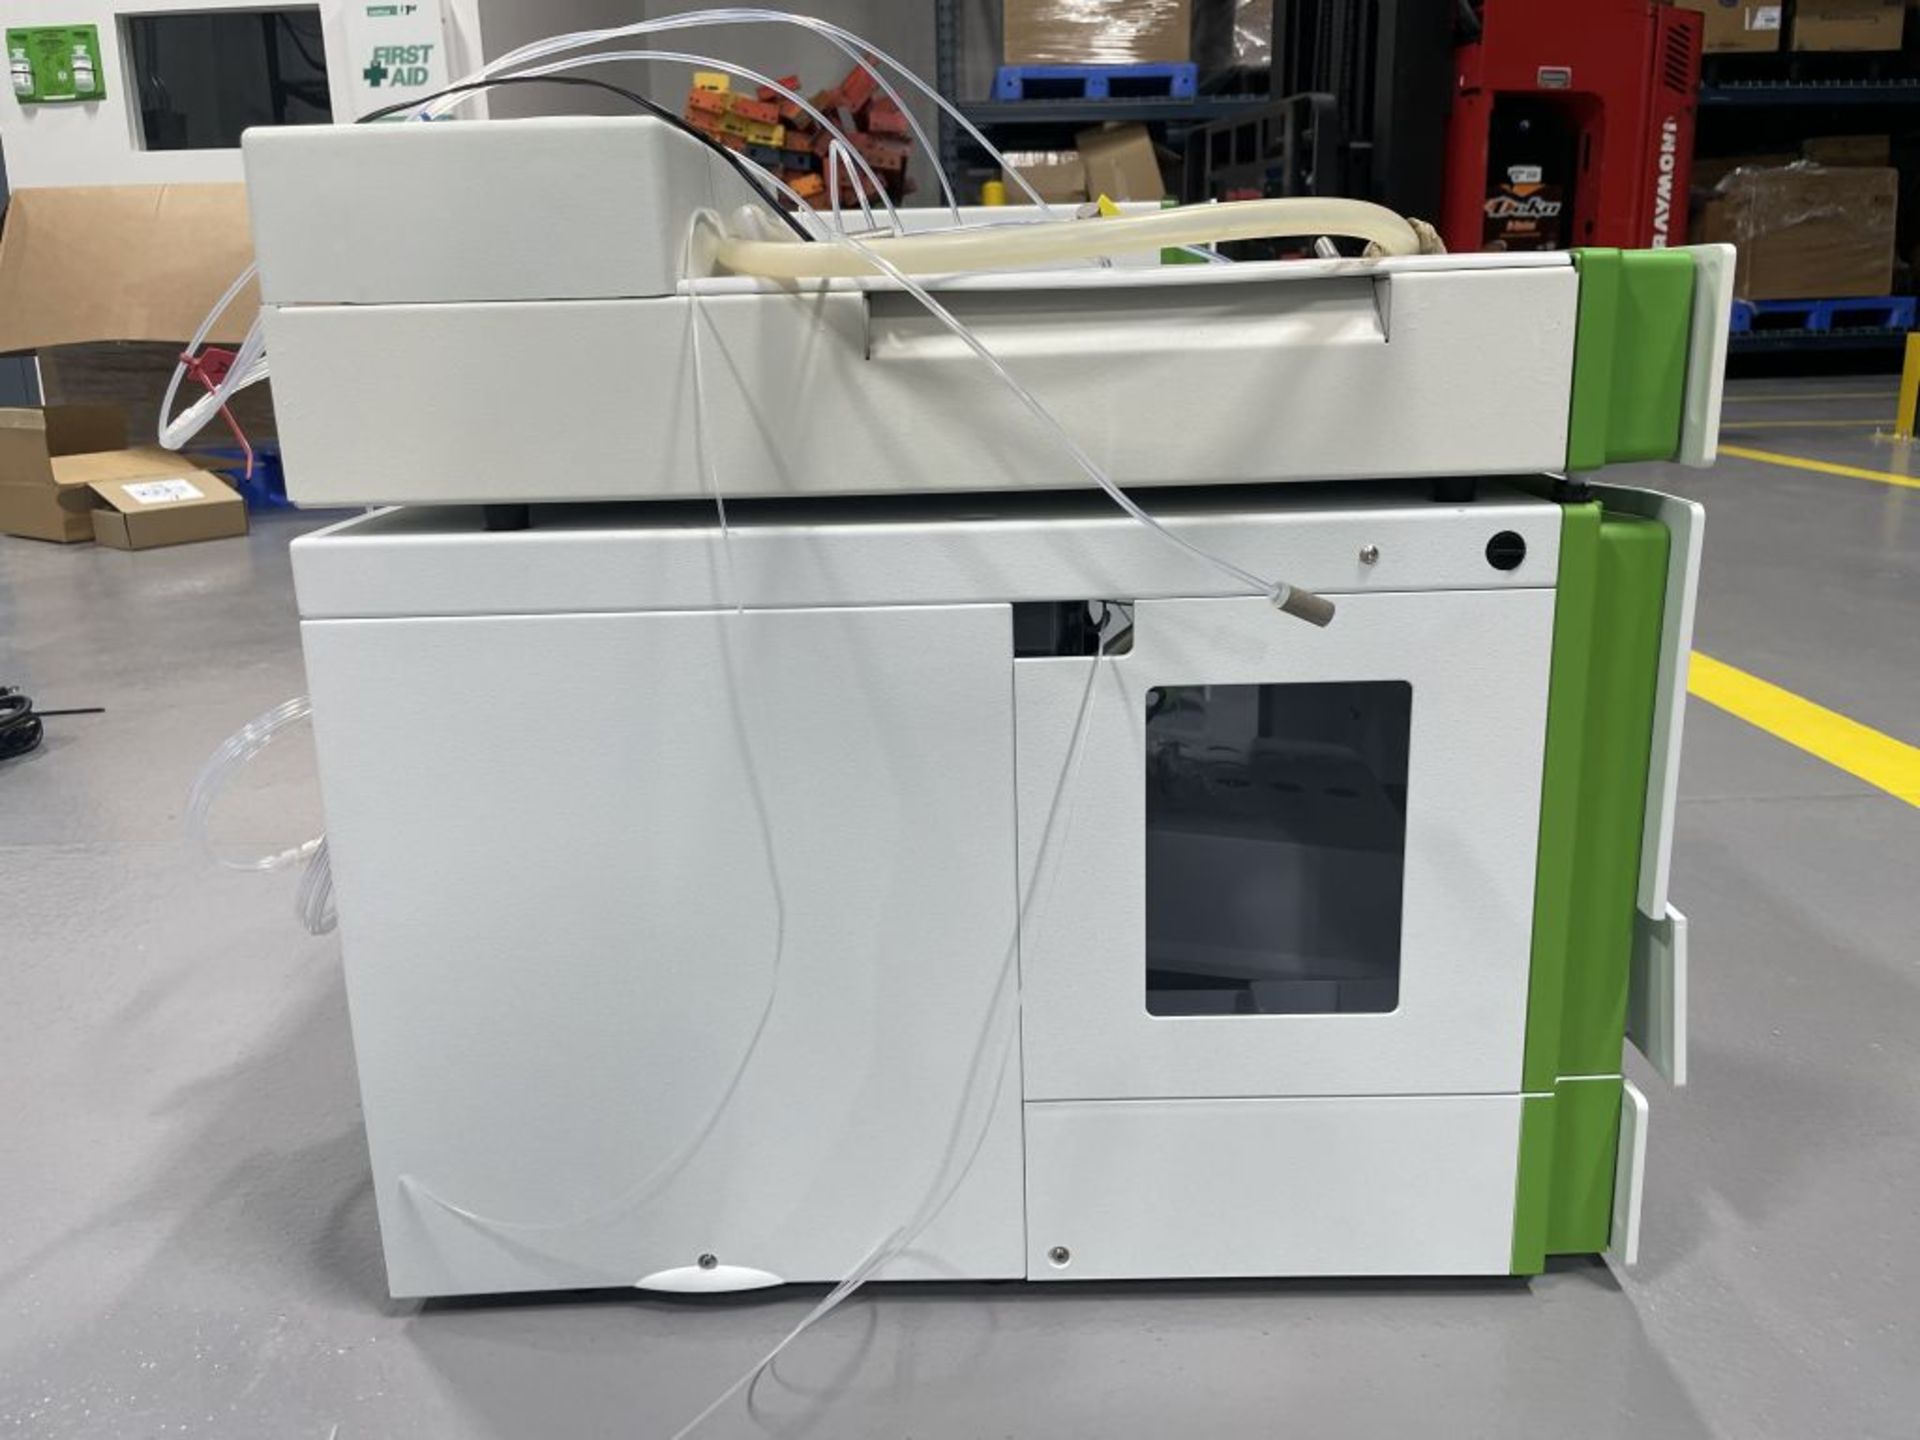 Perkin Elmer UHPLC unit. This is an ultra-high performance chromatography (UHPLC). As shown in - Image 10 of 10